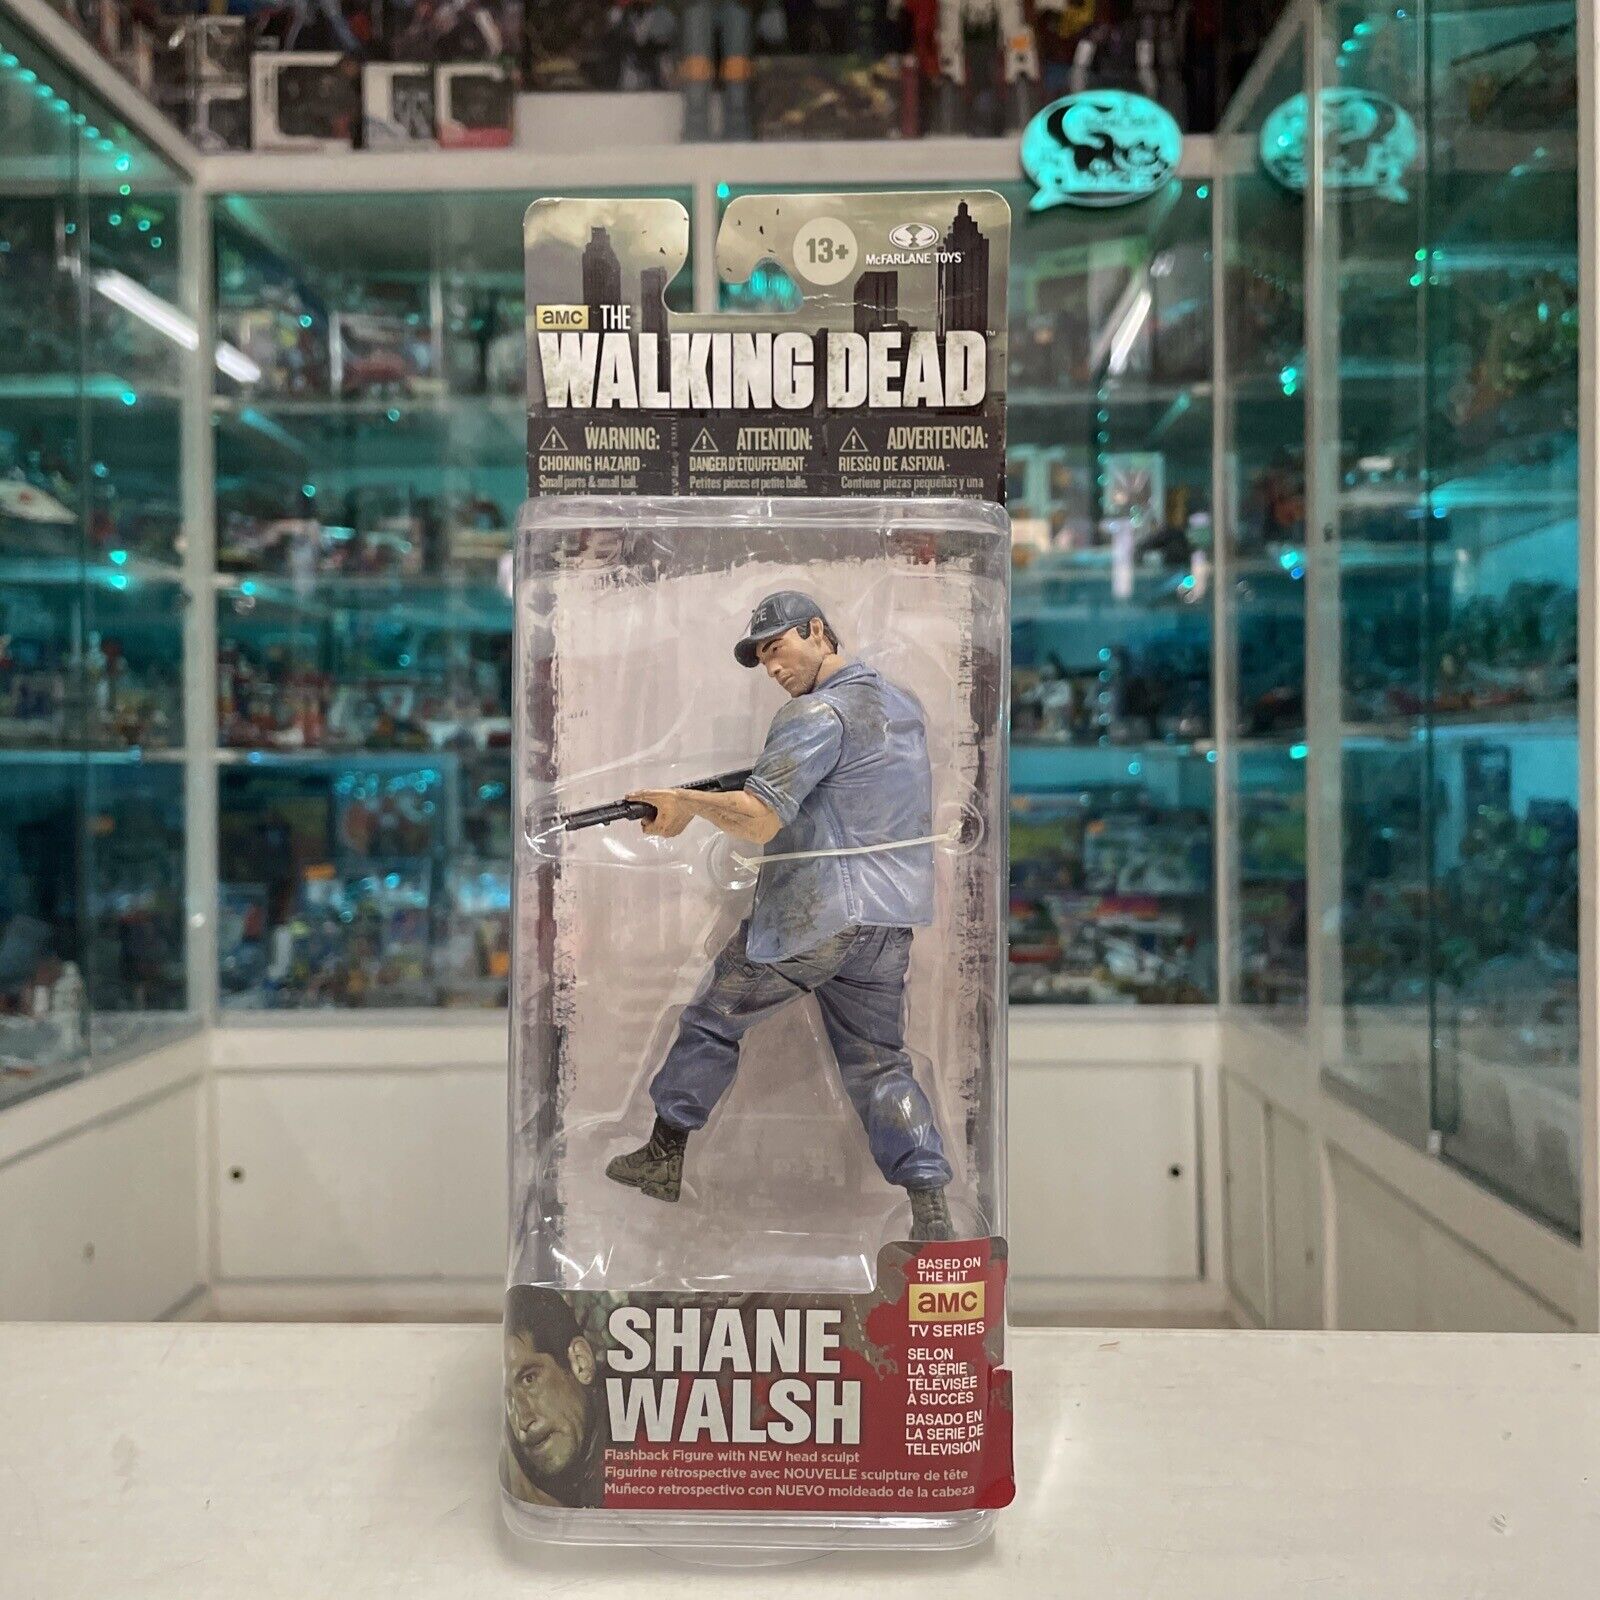 THE-WALKING-DEAD-SERIE-5-Shane-Walsh-ACTION-FIGURE-MCFARLANE-TOYS-134879070193